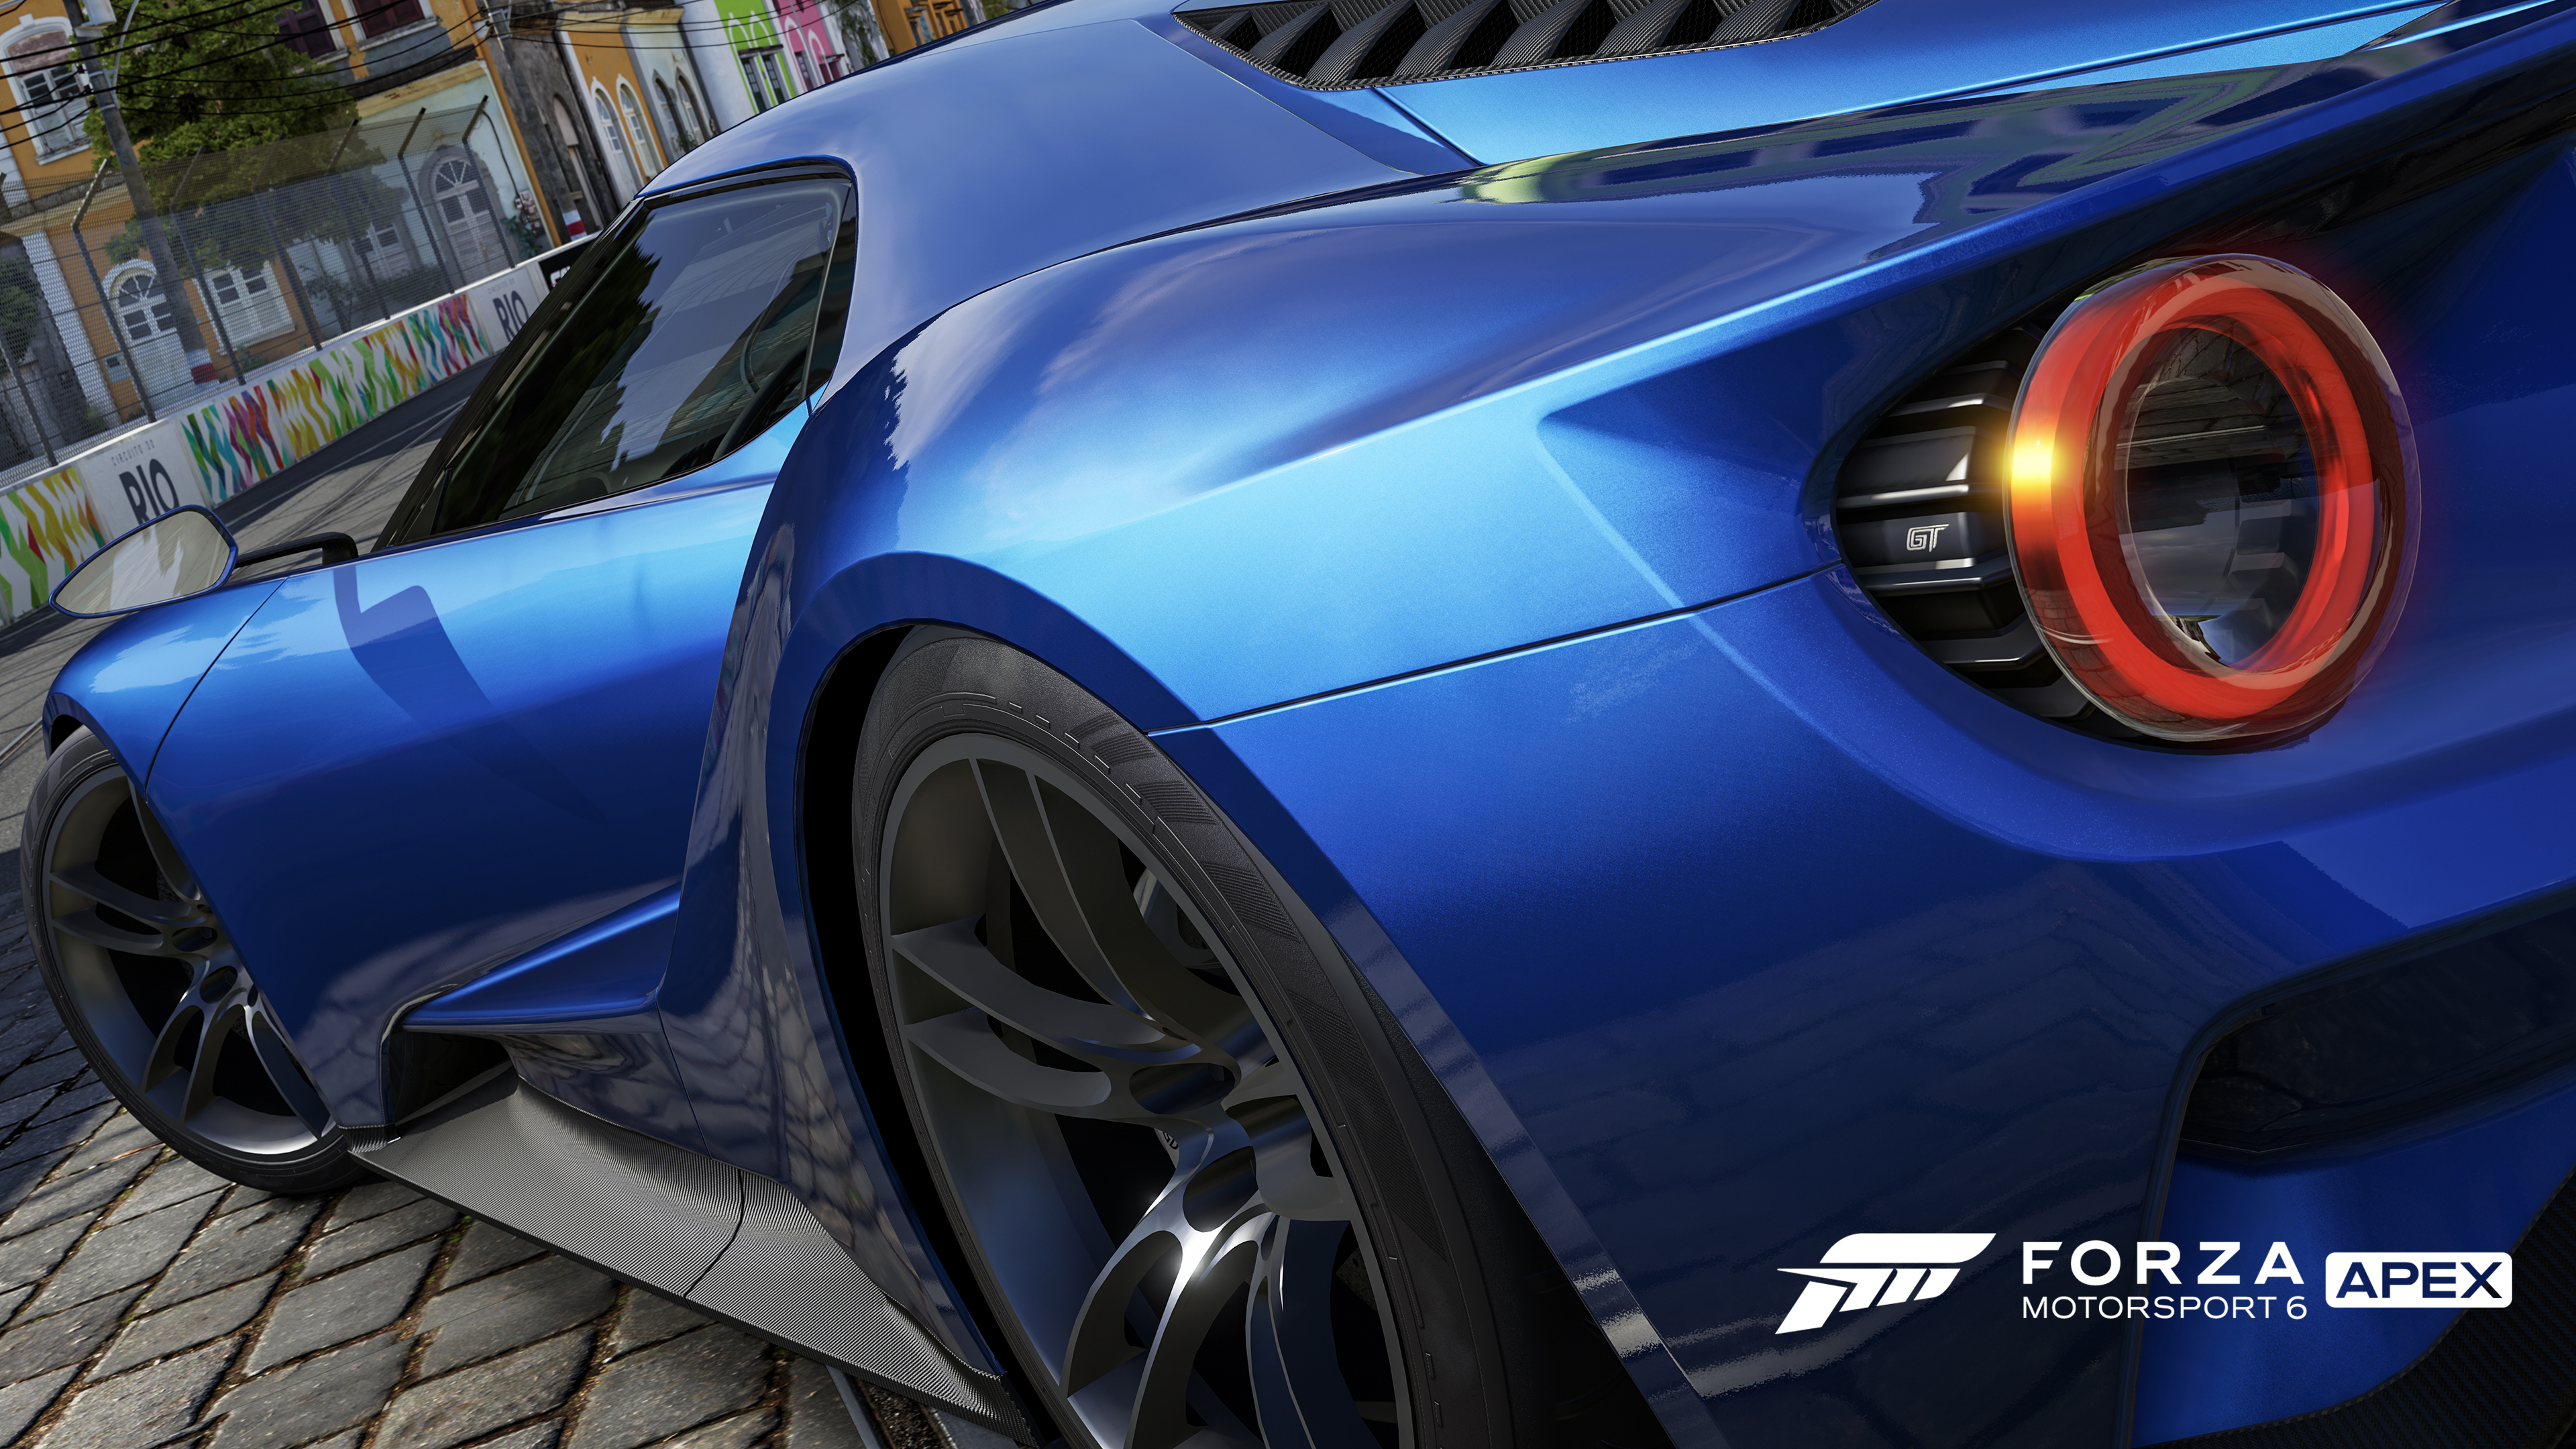 Forza Motorsport 6: Apex looks incredible on the PC at 4K